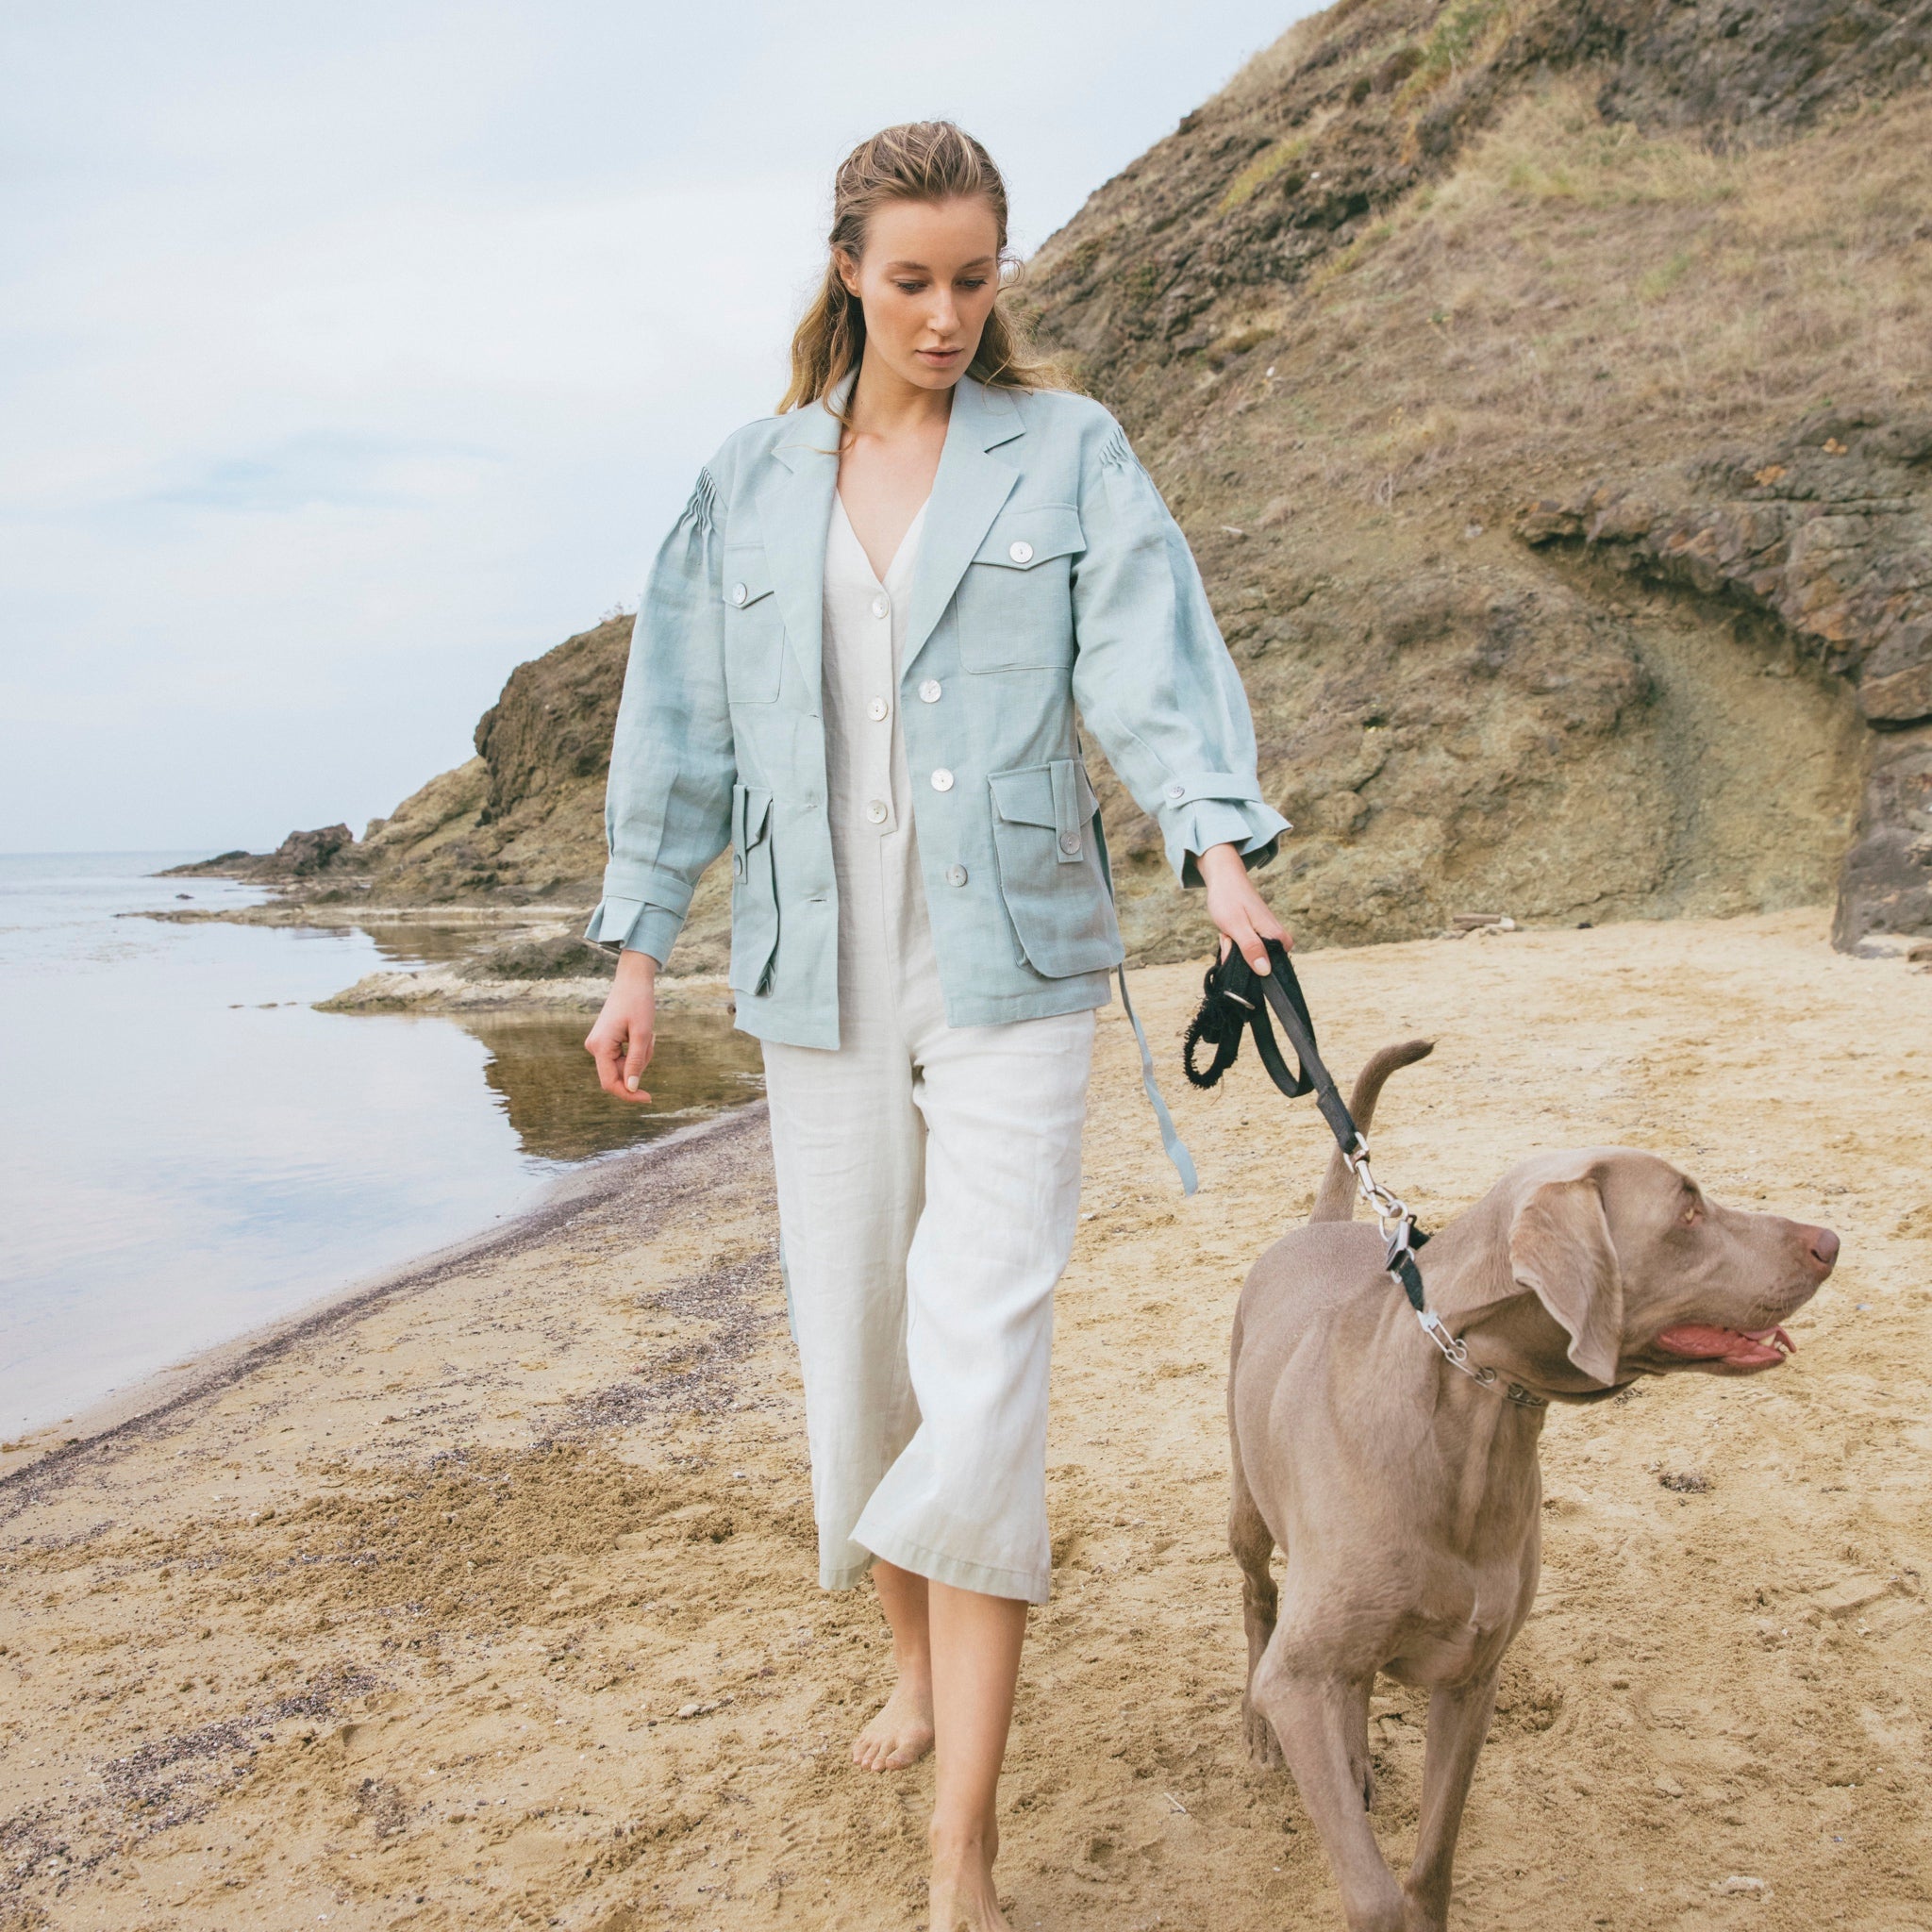 Dor Raw Luxury - The Slow Fashion Destination for Linen Clothing